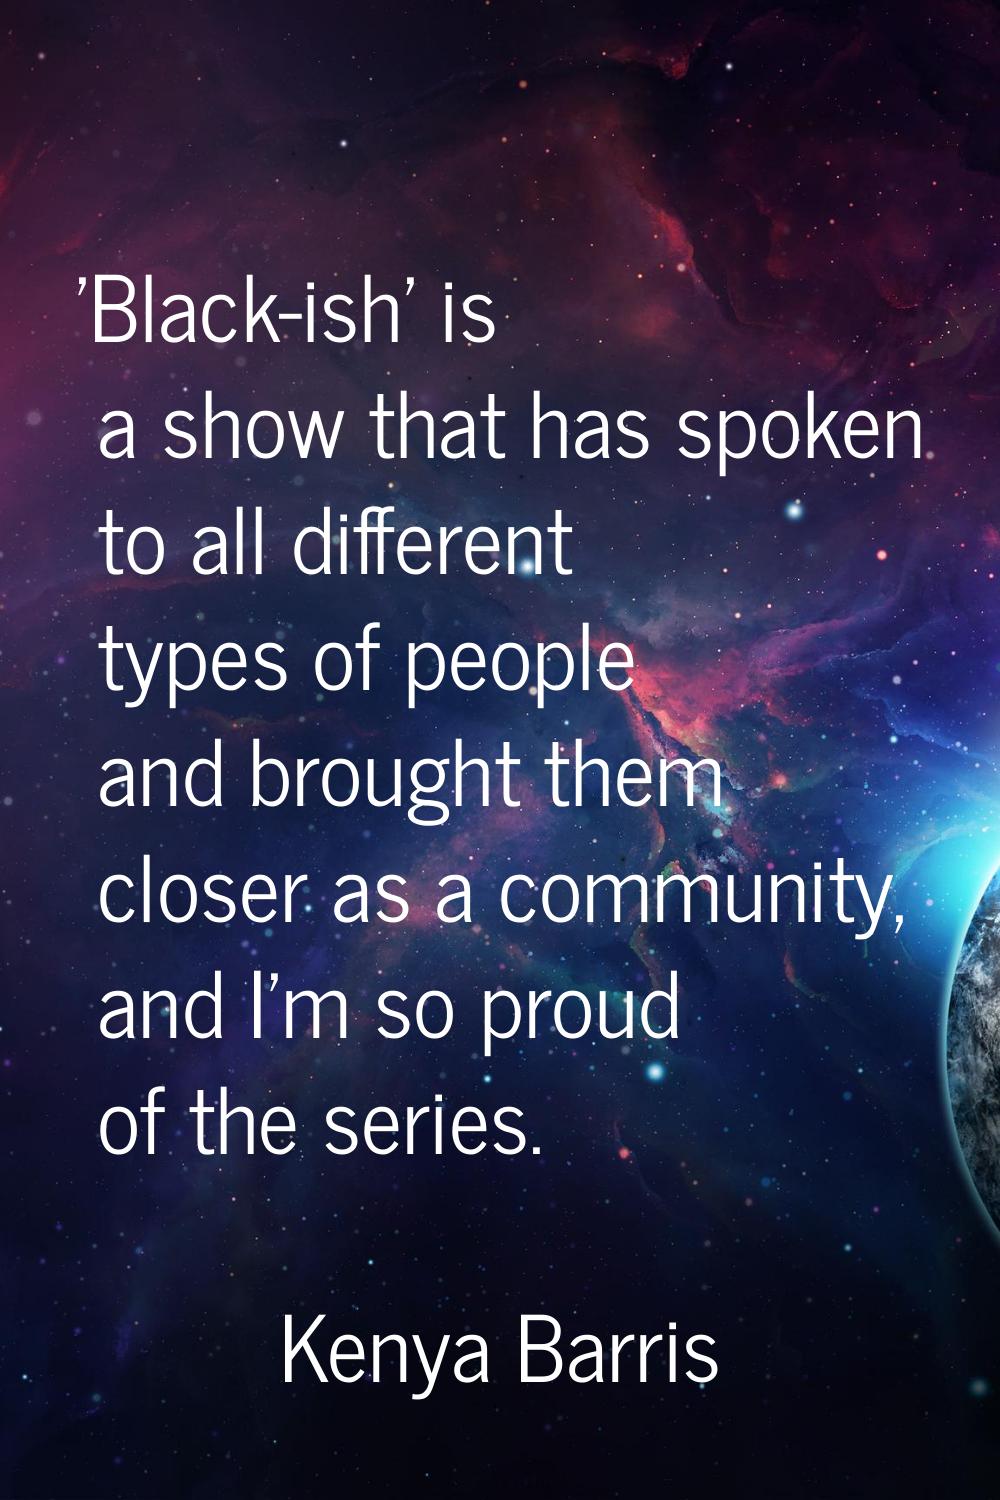 'Black-ish' is a show that has spoken to all different types of people and brought them closer as a